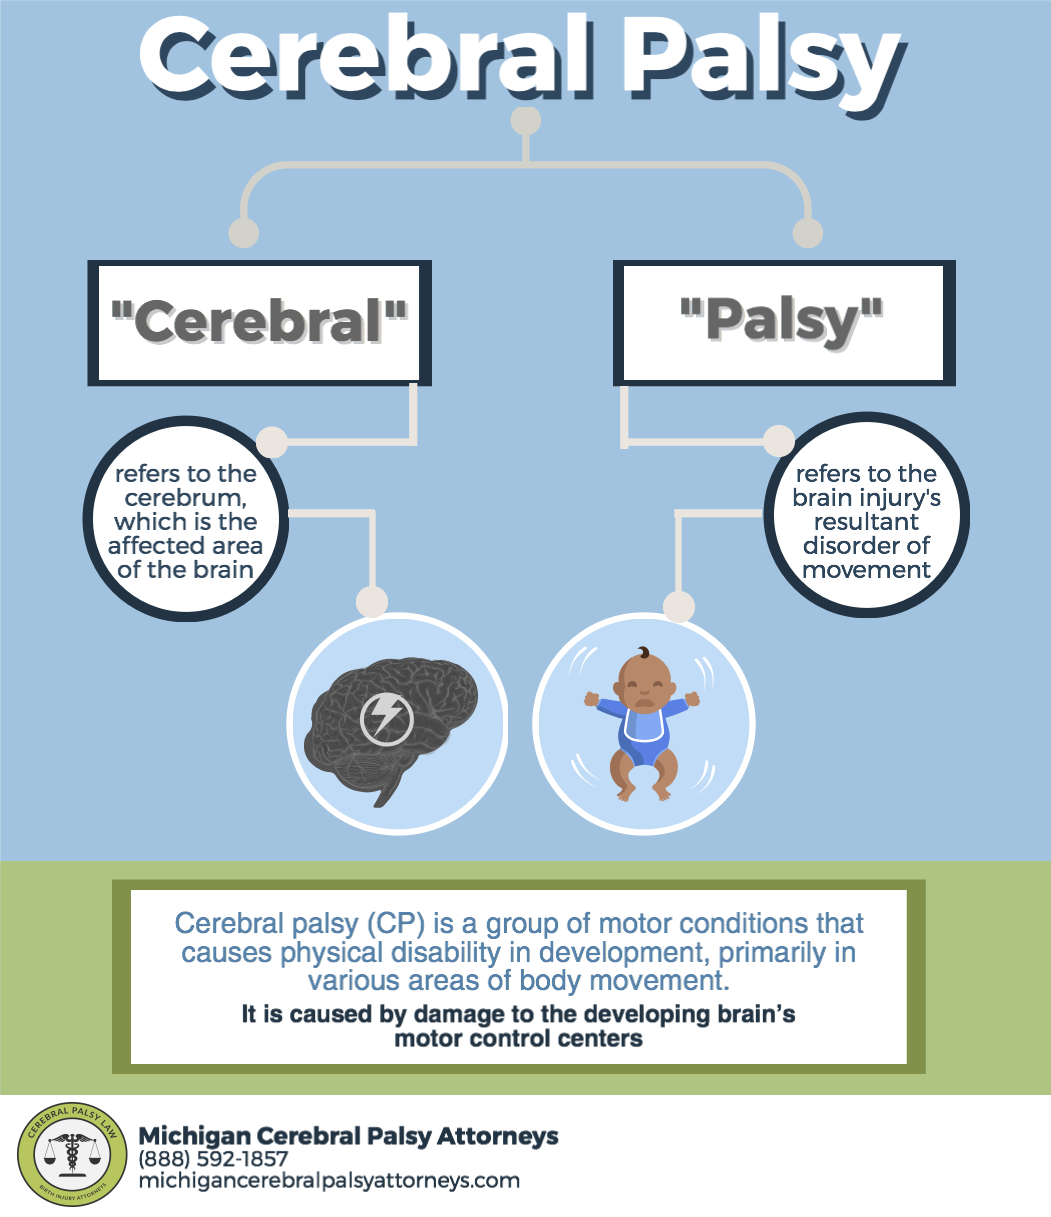 about cerebral palsy | michigan cerebral palsy attorneys